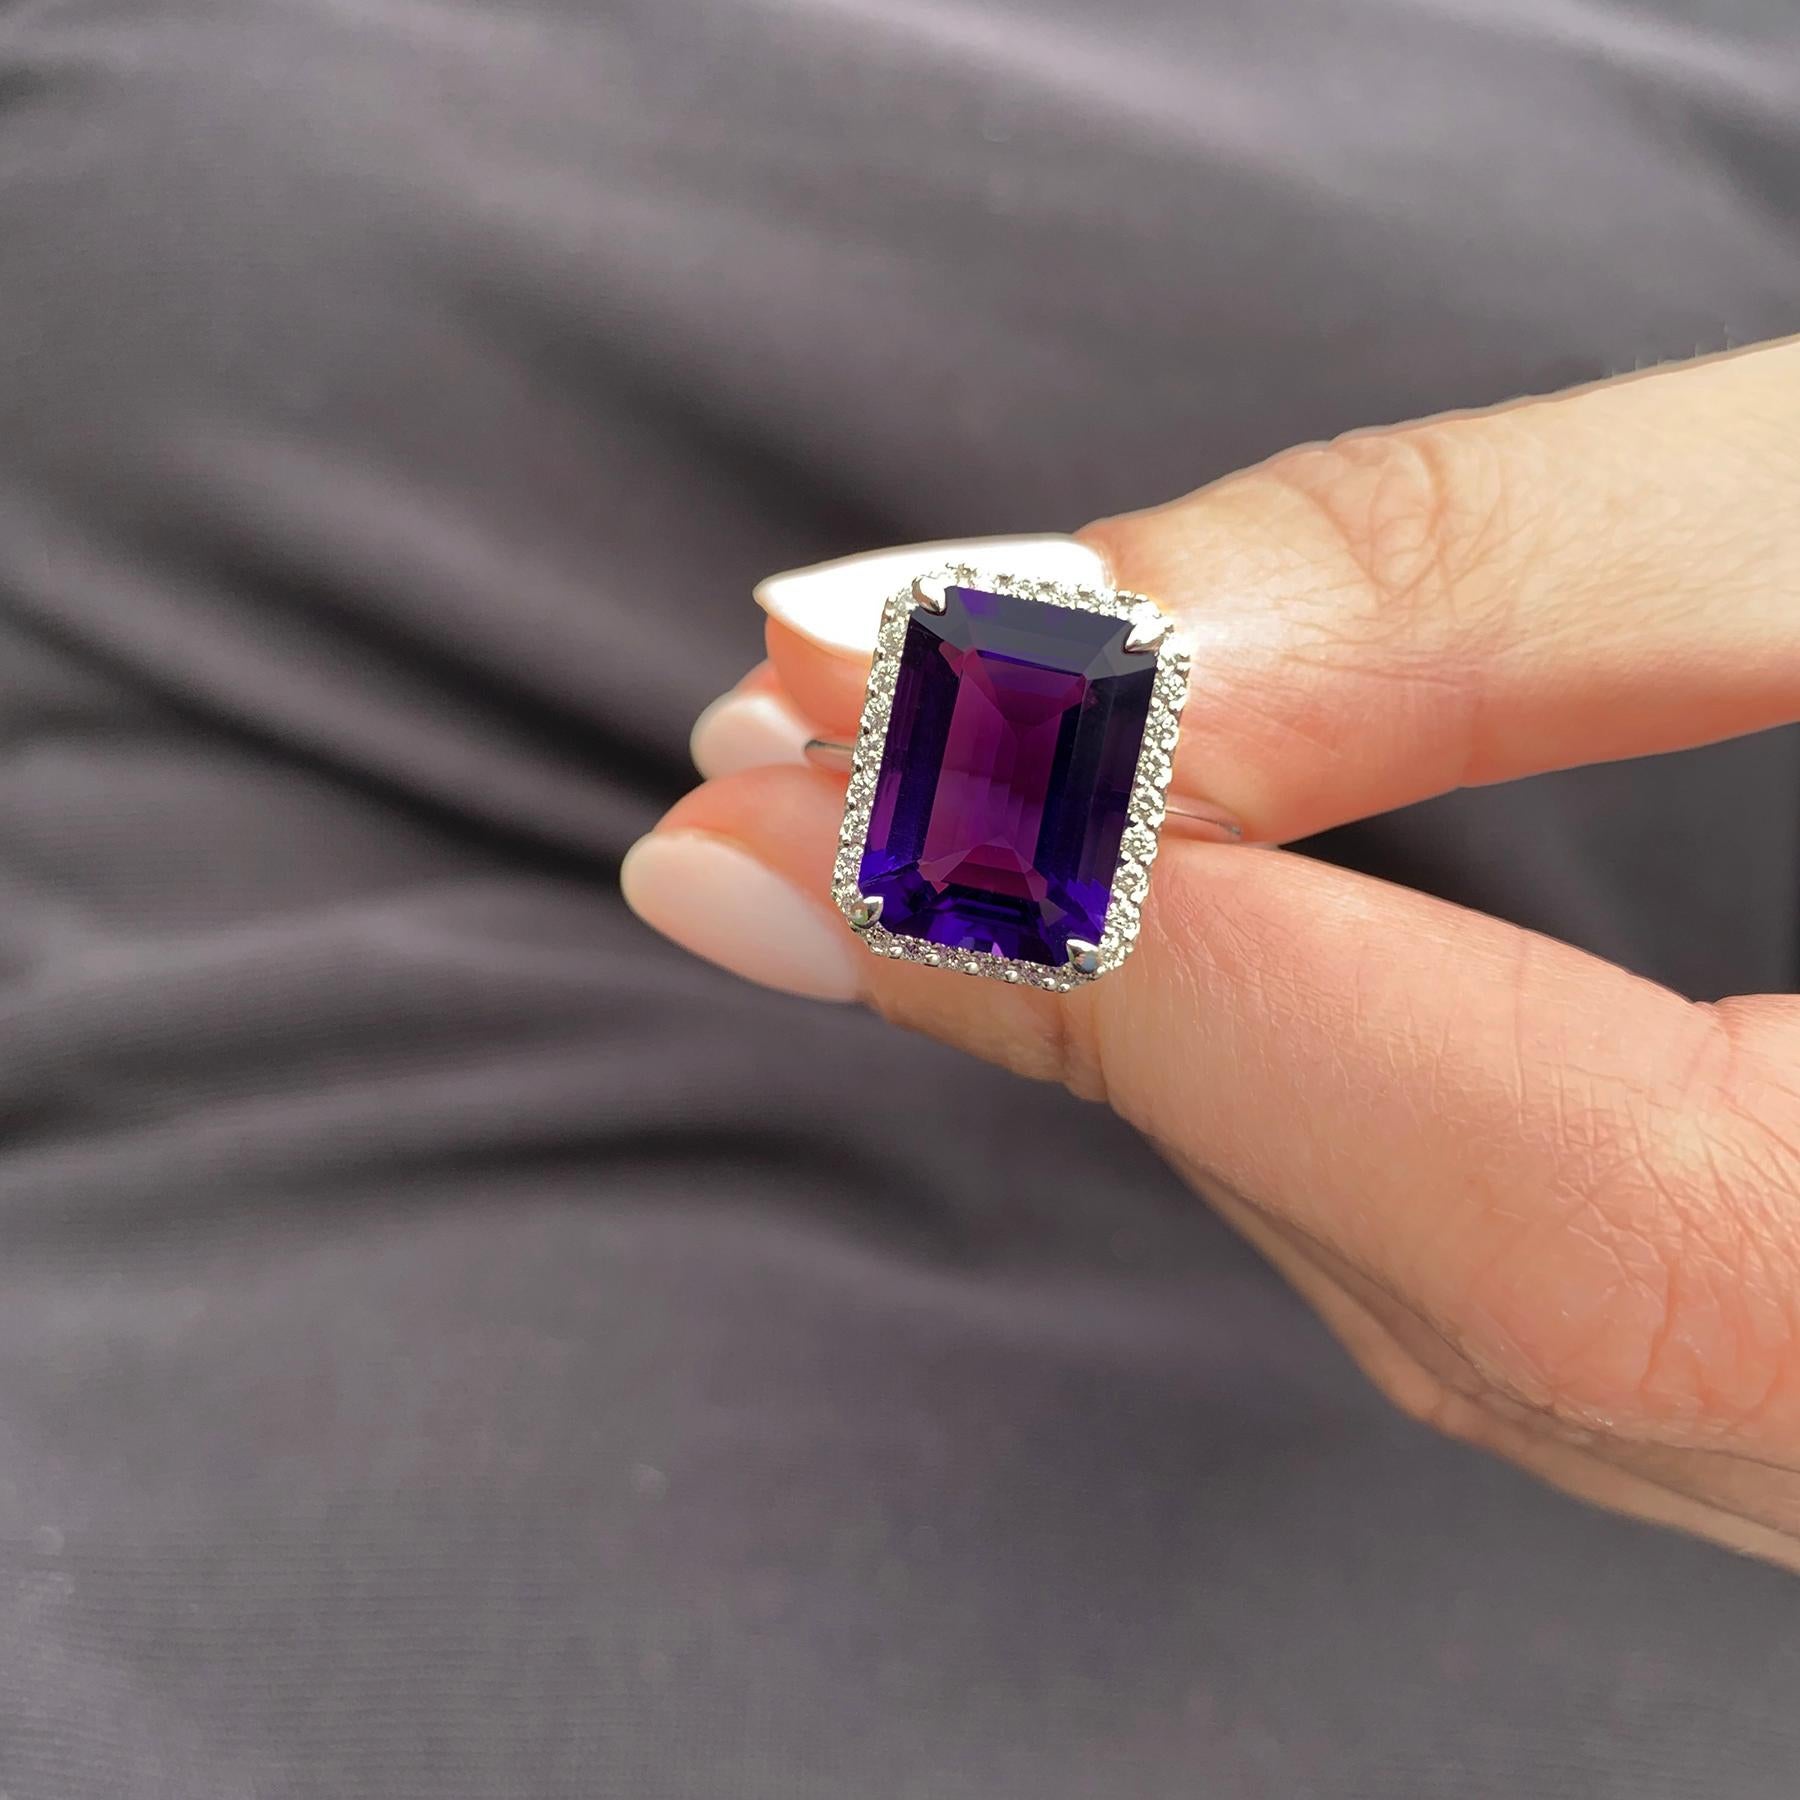 A deep purple rectangular amethyst sits perfectly framed by exquisitely scintillating round brilliant cut diamonds crafted in 18 karat white gold. An impressive but very elegant cocktail ring.

1 Step Cut Amethyst 6.00 carat
30 Round Brilliant Cut